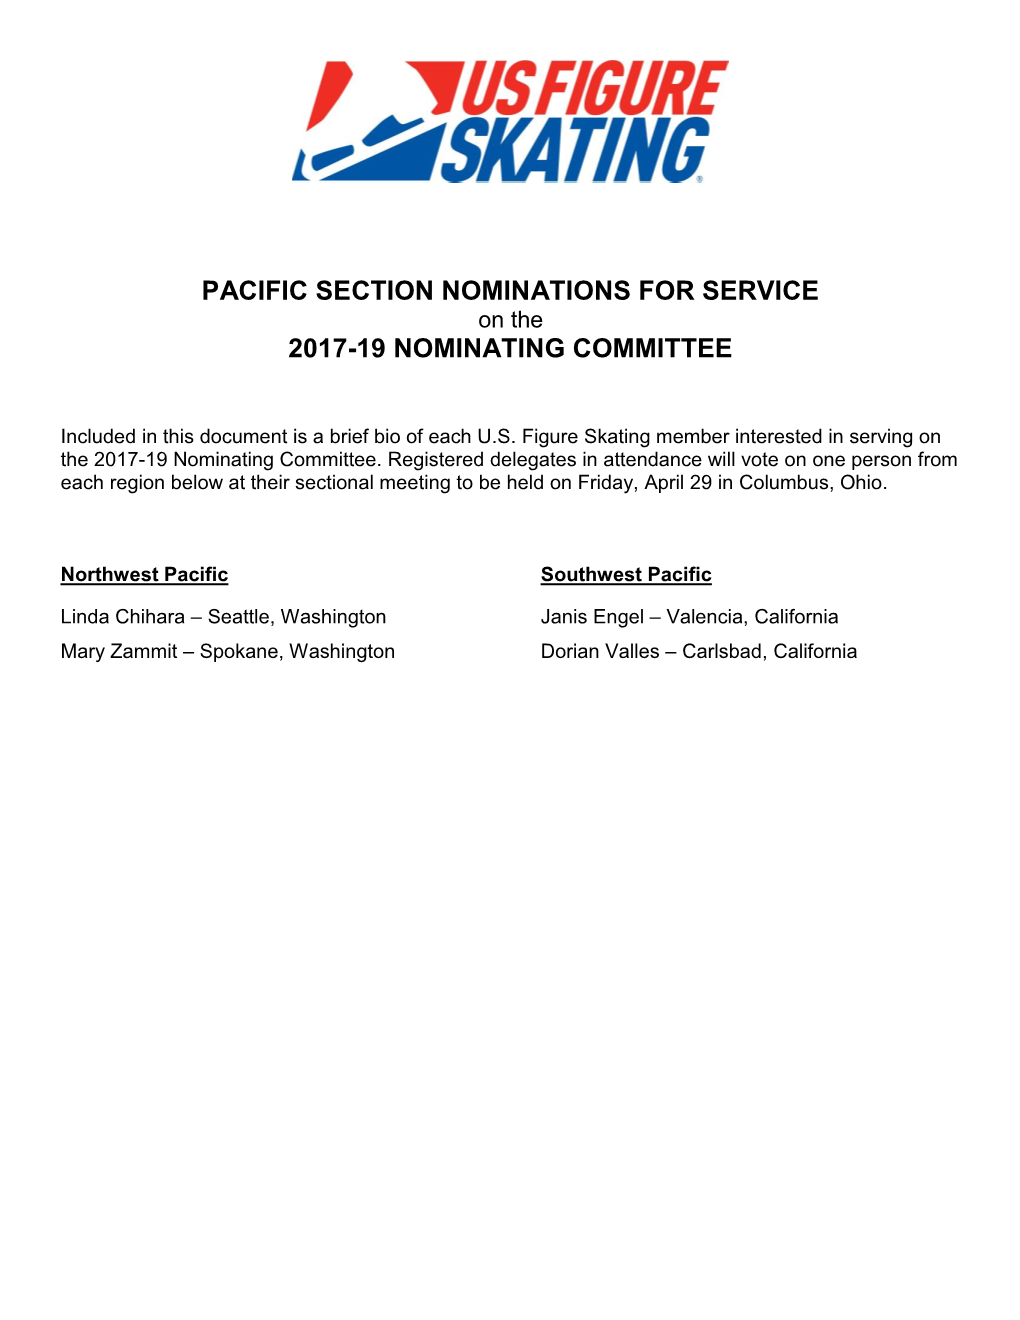 Pacific Section Nominations for Service 2017-19